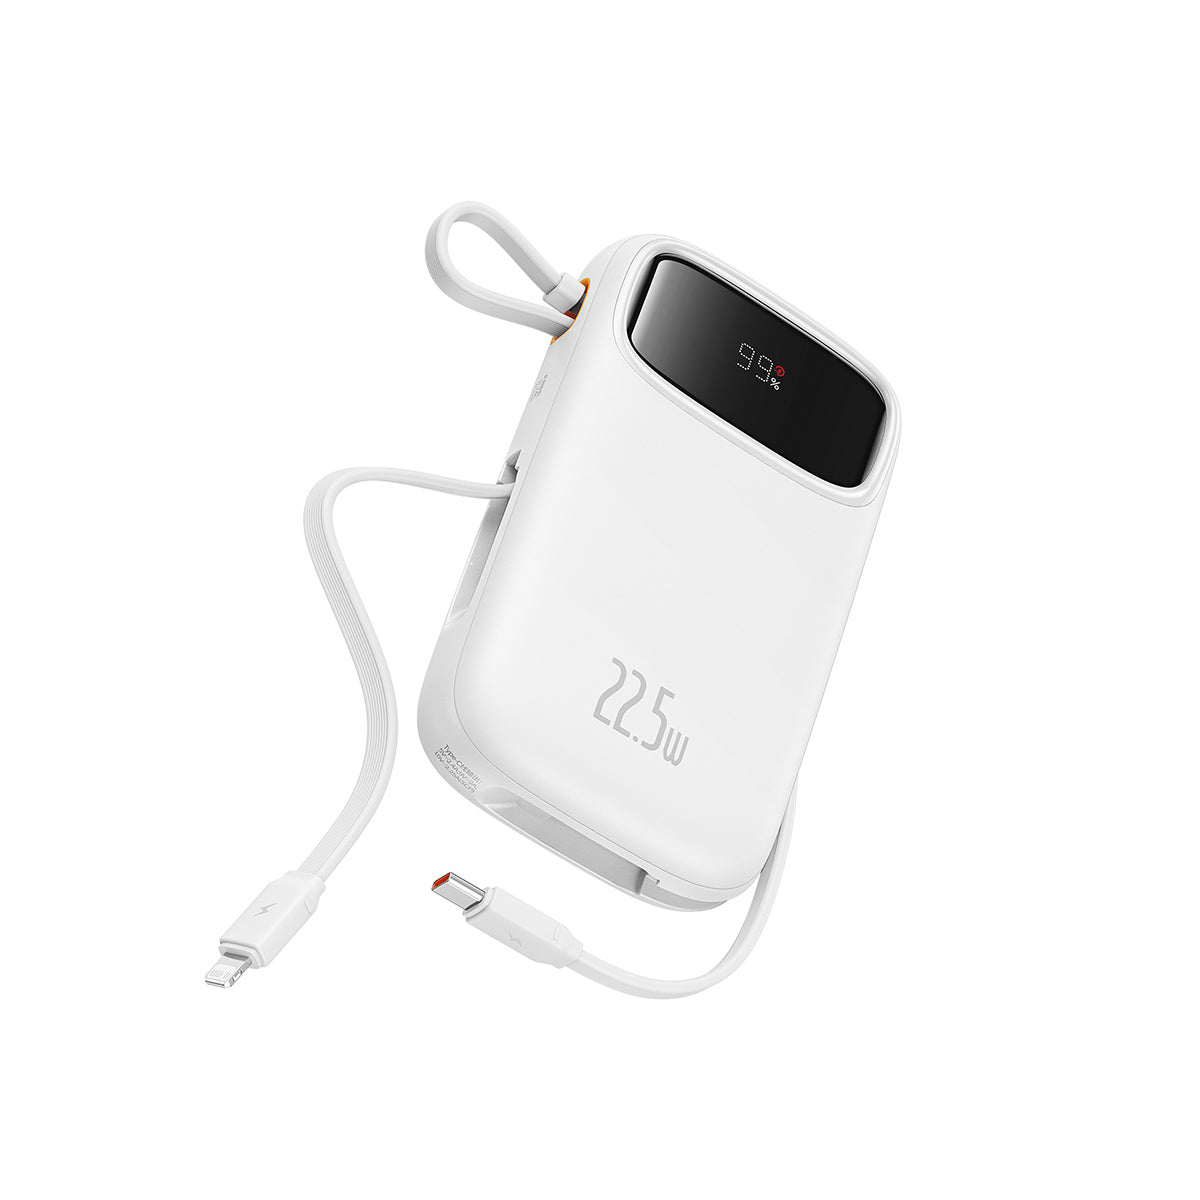 Baseus Qpow2 Power Bank 22.5W 10000mAh white_build-in 2 cable